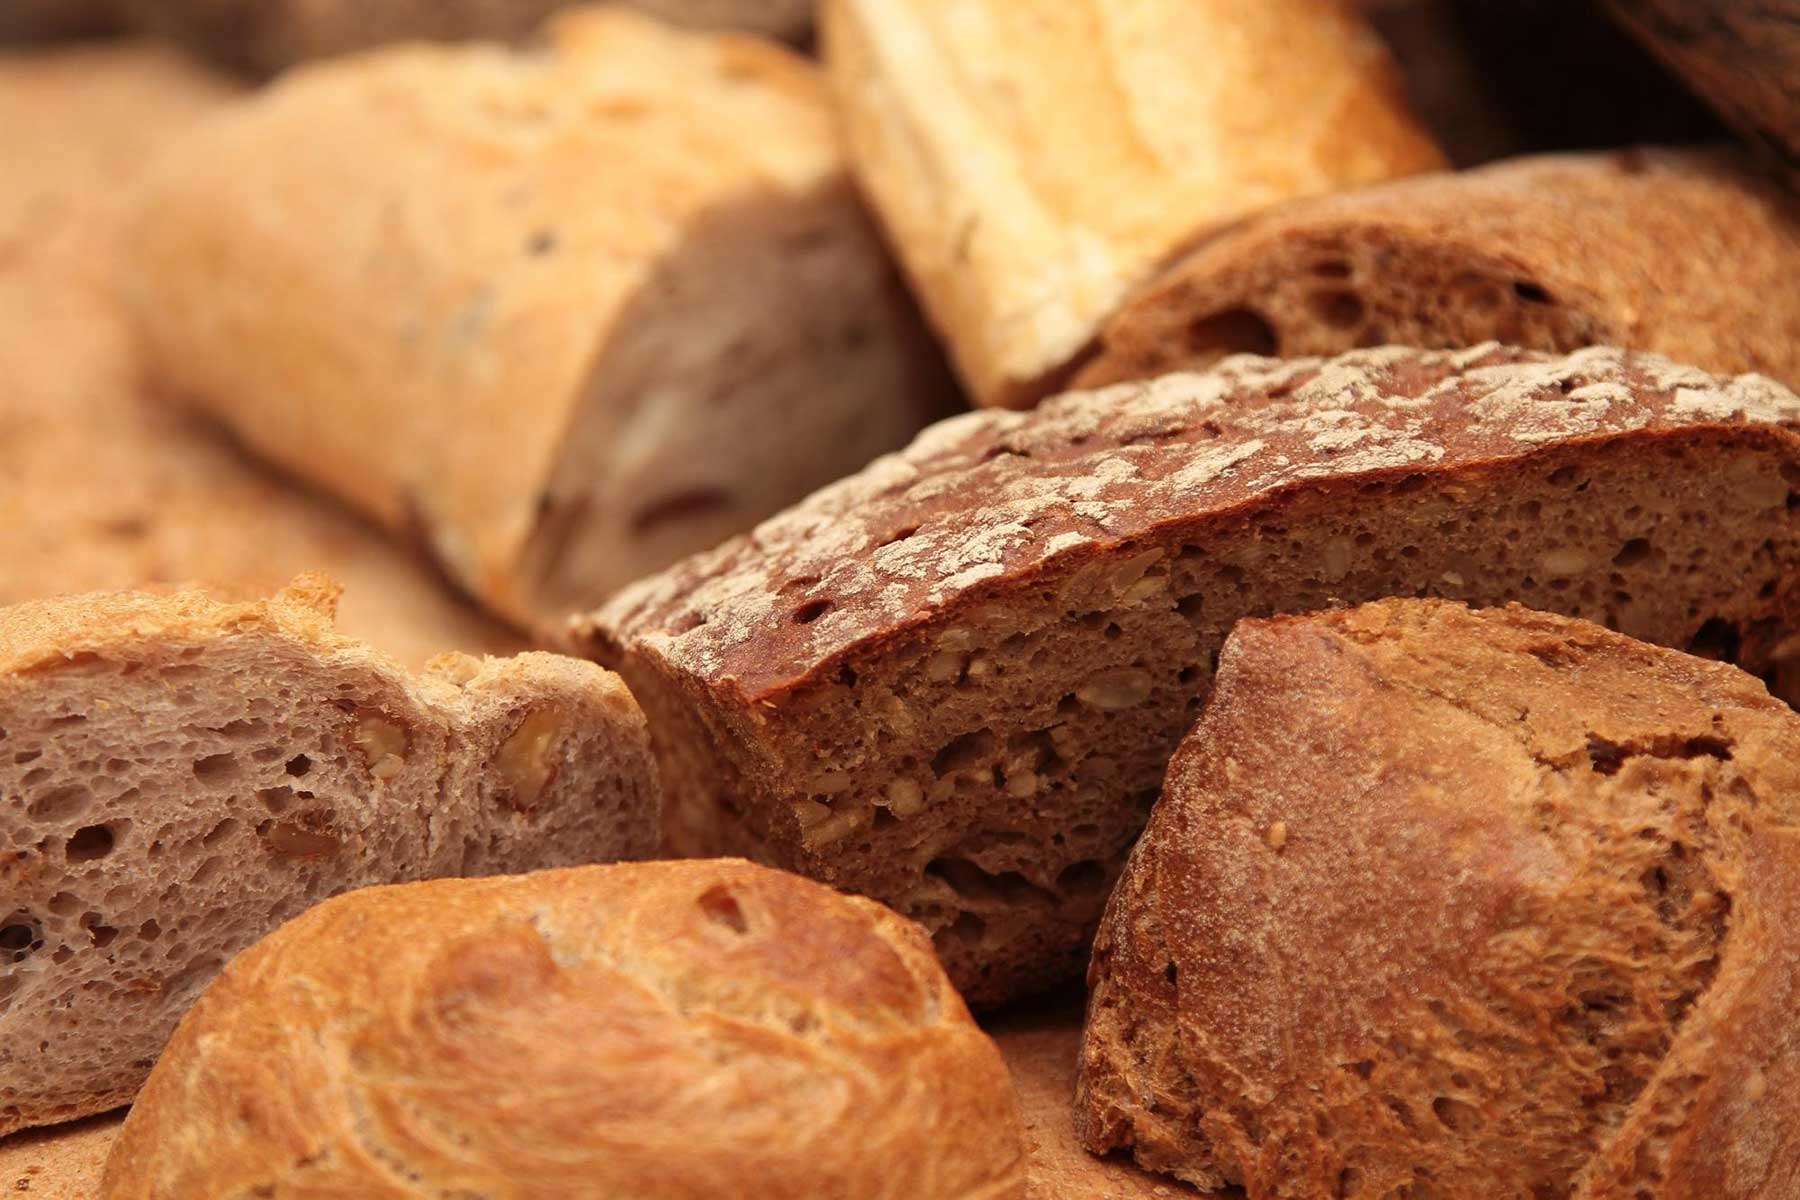 Gluten-Heavy Diets Can Lead to Celiac Disease Later in Life